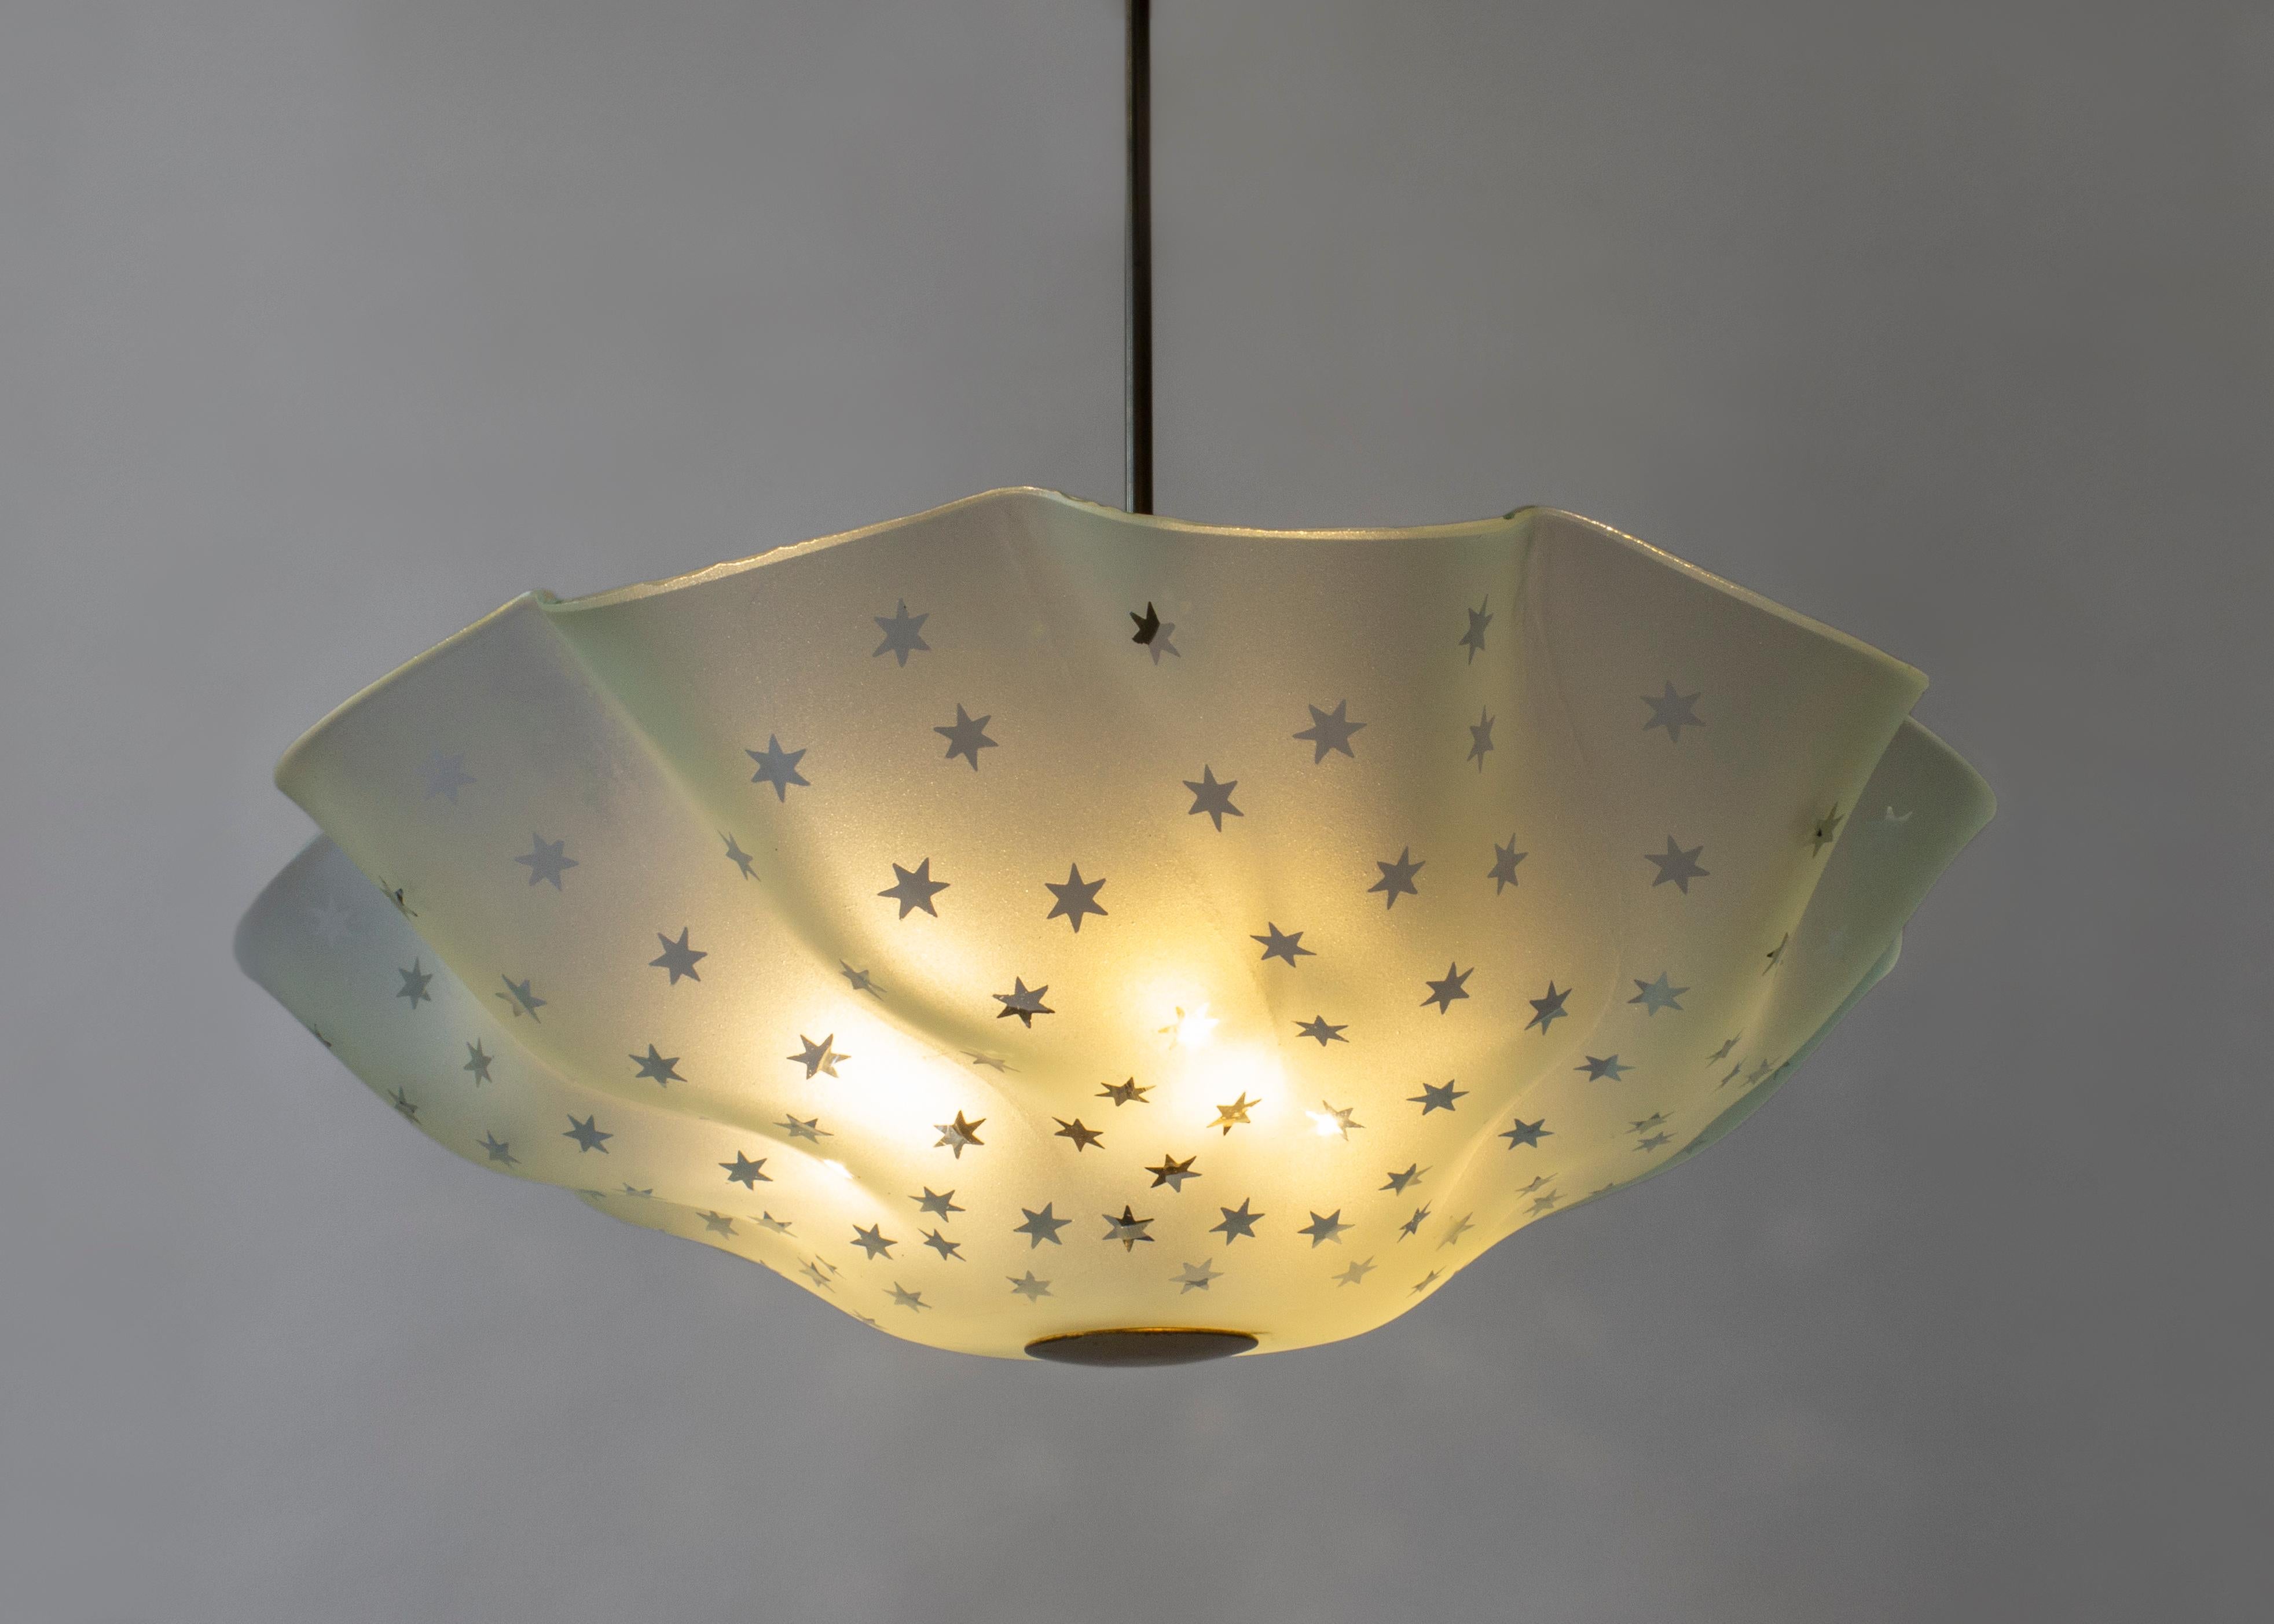 An incredibly rare and beautiful model. The patinated brass canopy and hanging-rod, above an ethereal blue/green frosted glass diffuser, sumptuously folded and adorned in a spray of transparent stars. 

The height can easily be adjusted. The